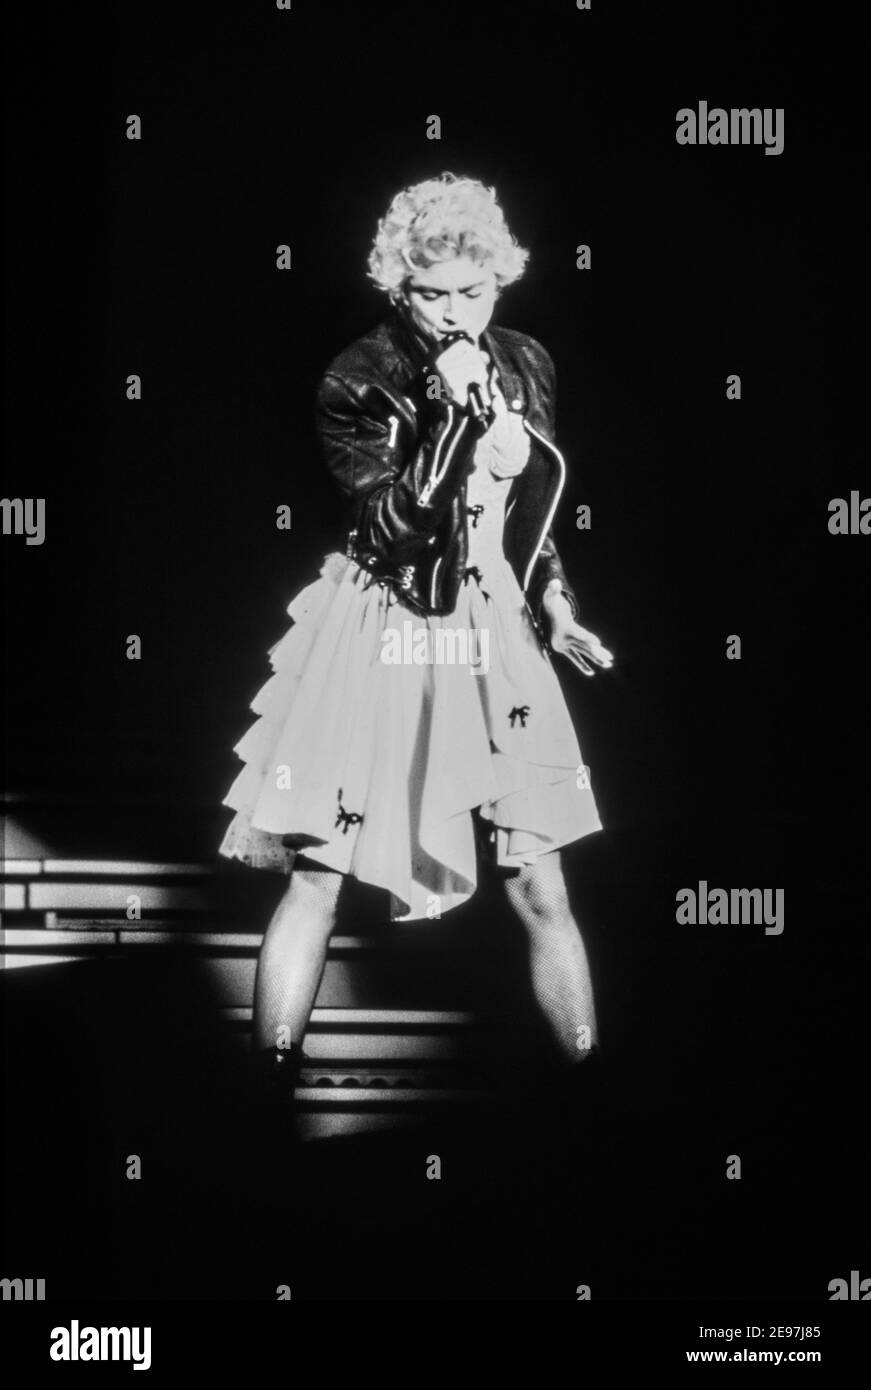 ROTTERDAM, THE NETHERLANDS - AUG 25,1987: Madonna live on stage during her “who’s that girl” world tour. Stock Photo